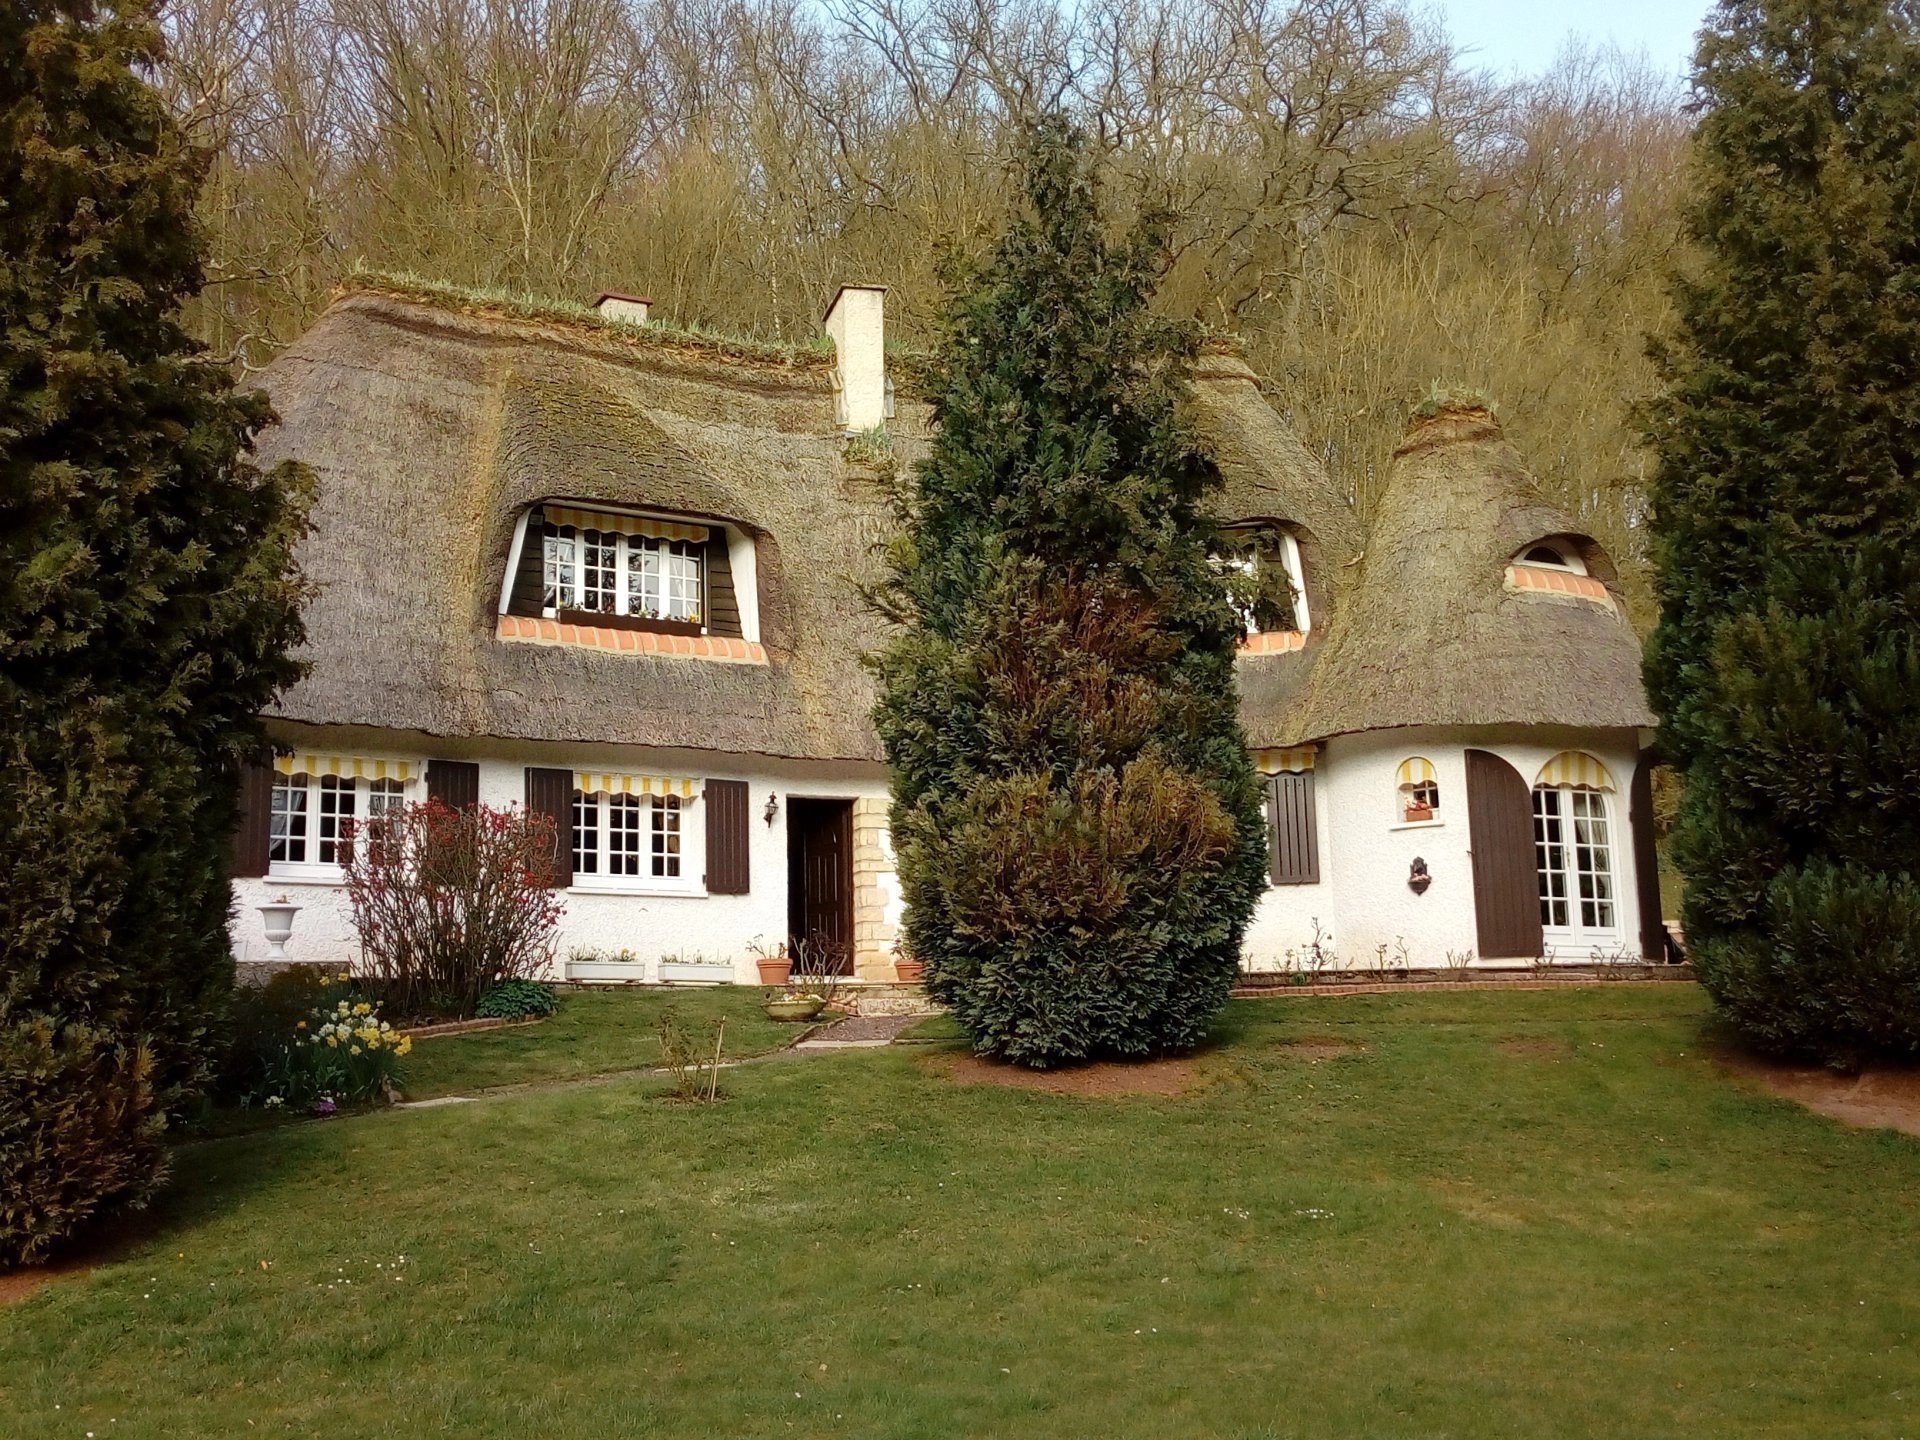 Exceptional 3 bedroom Thatched-Roof house in St Cyr la Campagne de Pasquier ( Normandy)